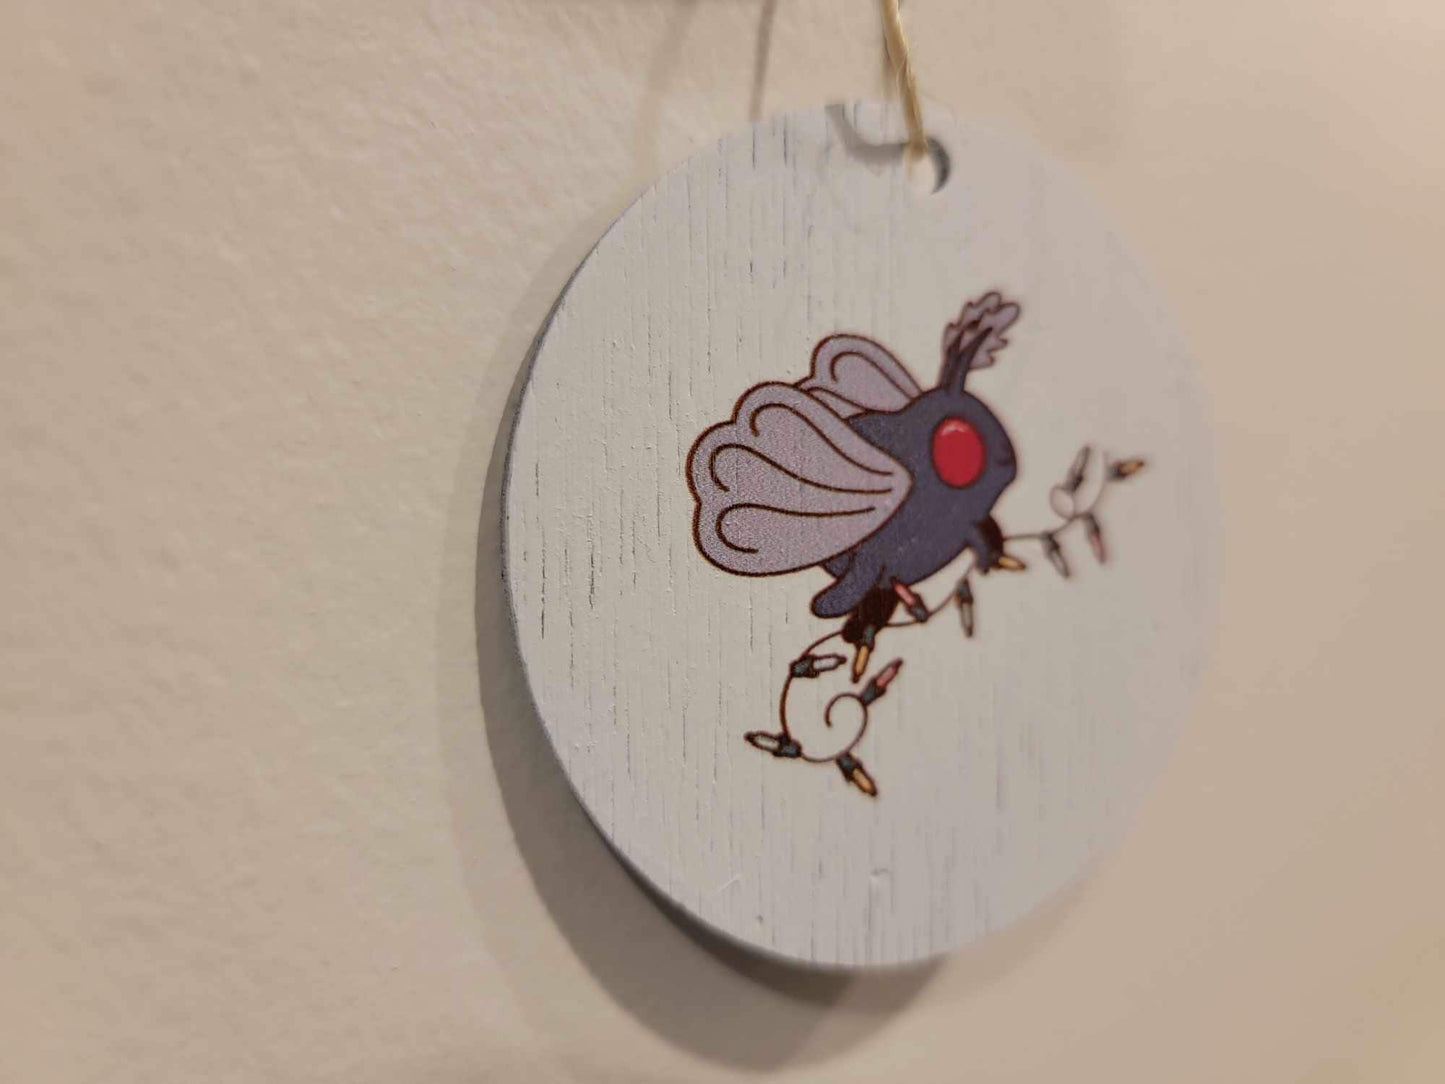 Moth man Christmas lights festive Cryptic Ornament Collector Mythical Printed Keychain Giftable Gift for Him Gift for her Wooden